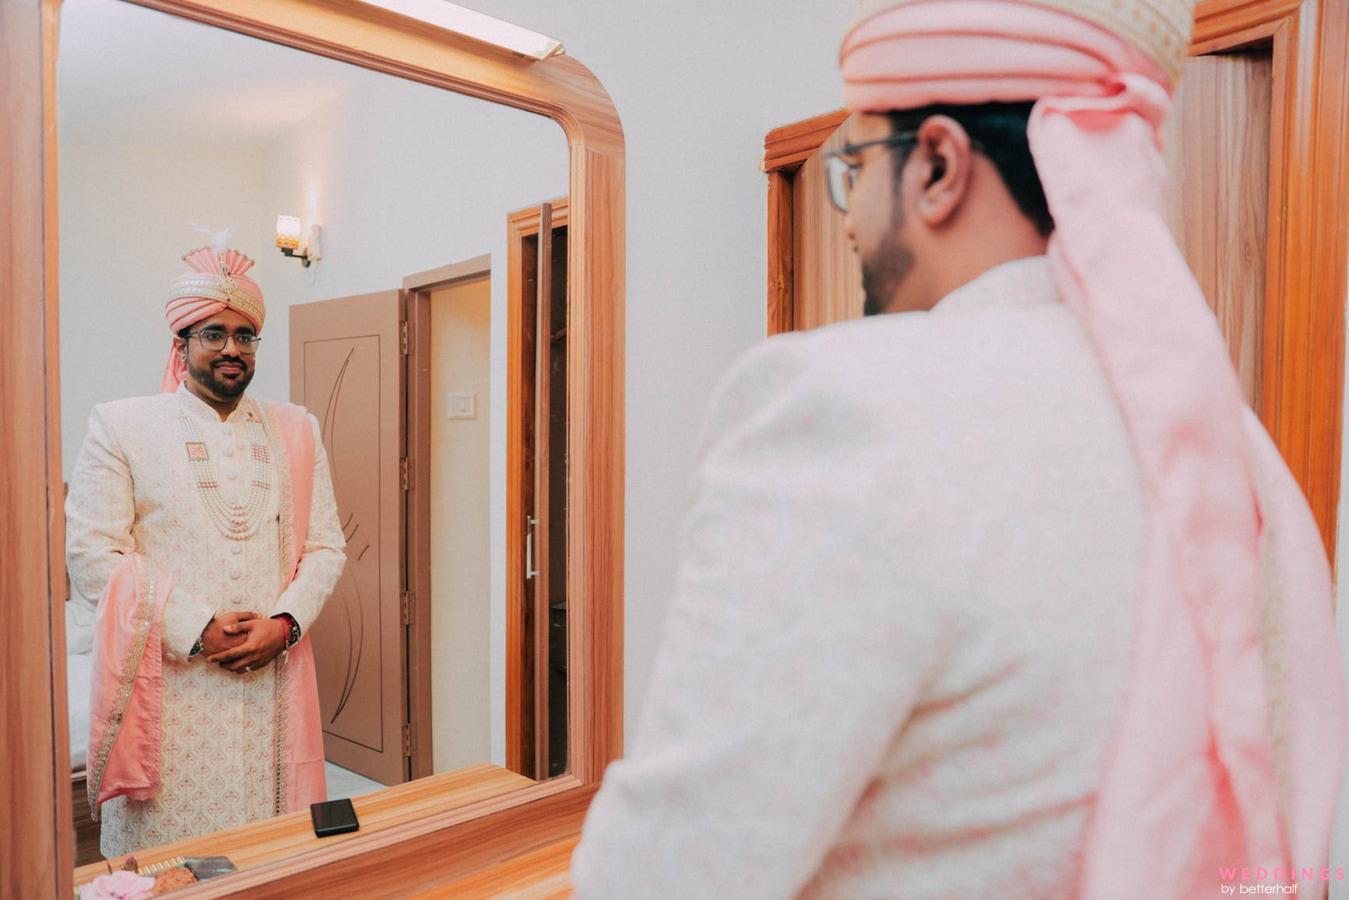 Dapper Groom Getting Ready Photos To Take Inspirations From | Groom  photoshoot, Indian wedding poses, Bride groom photoshoot